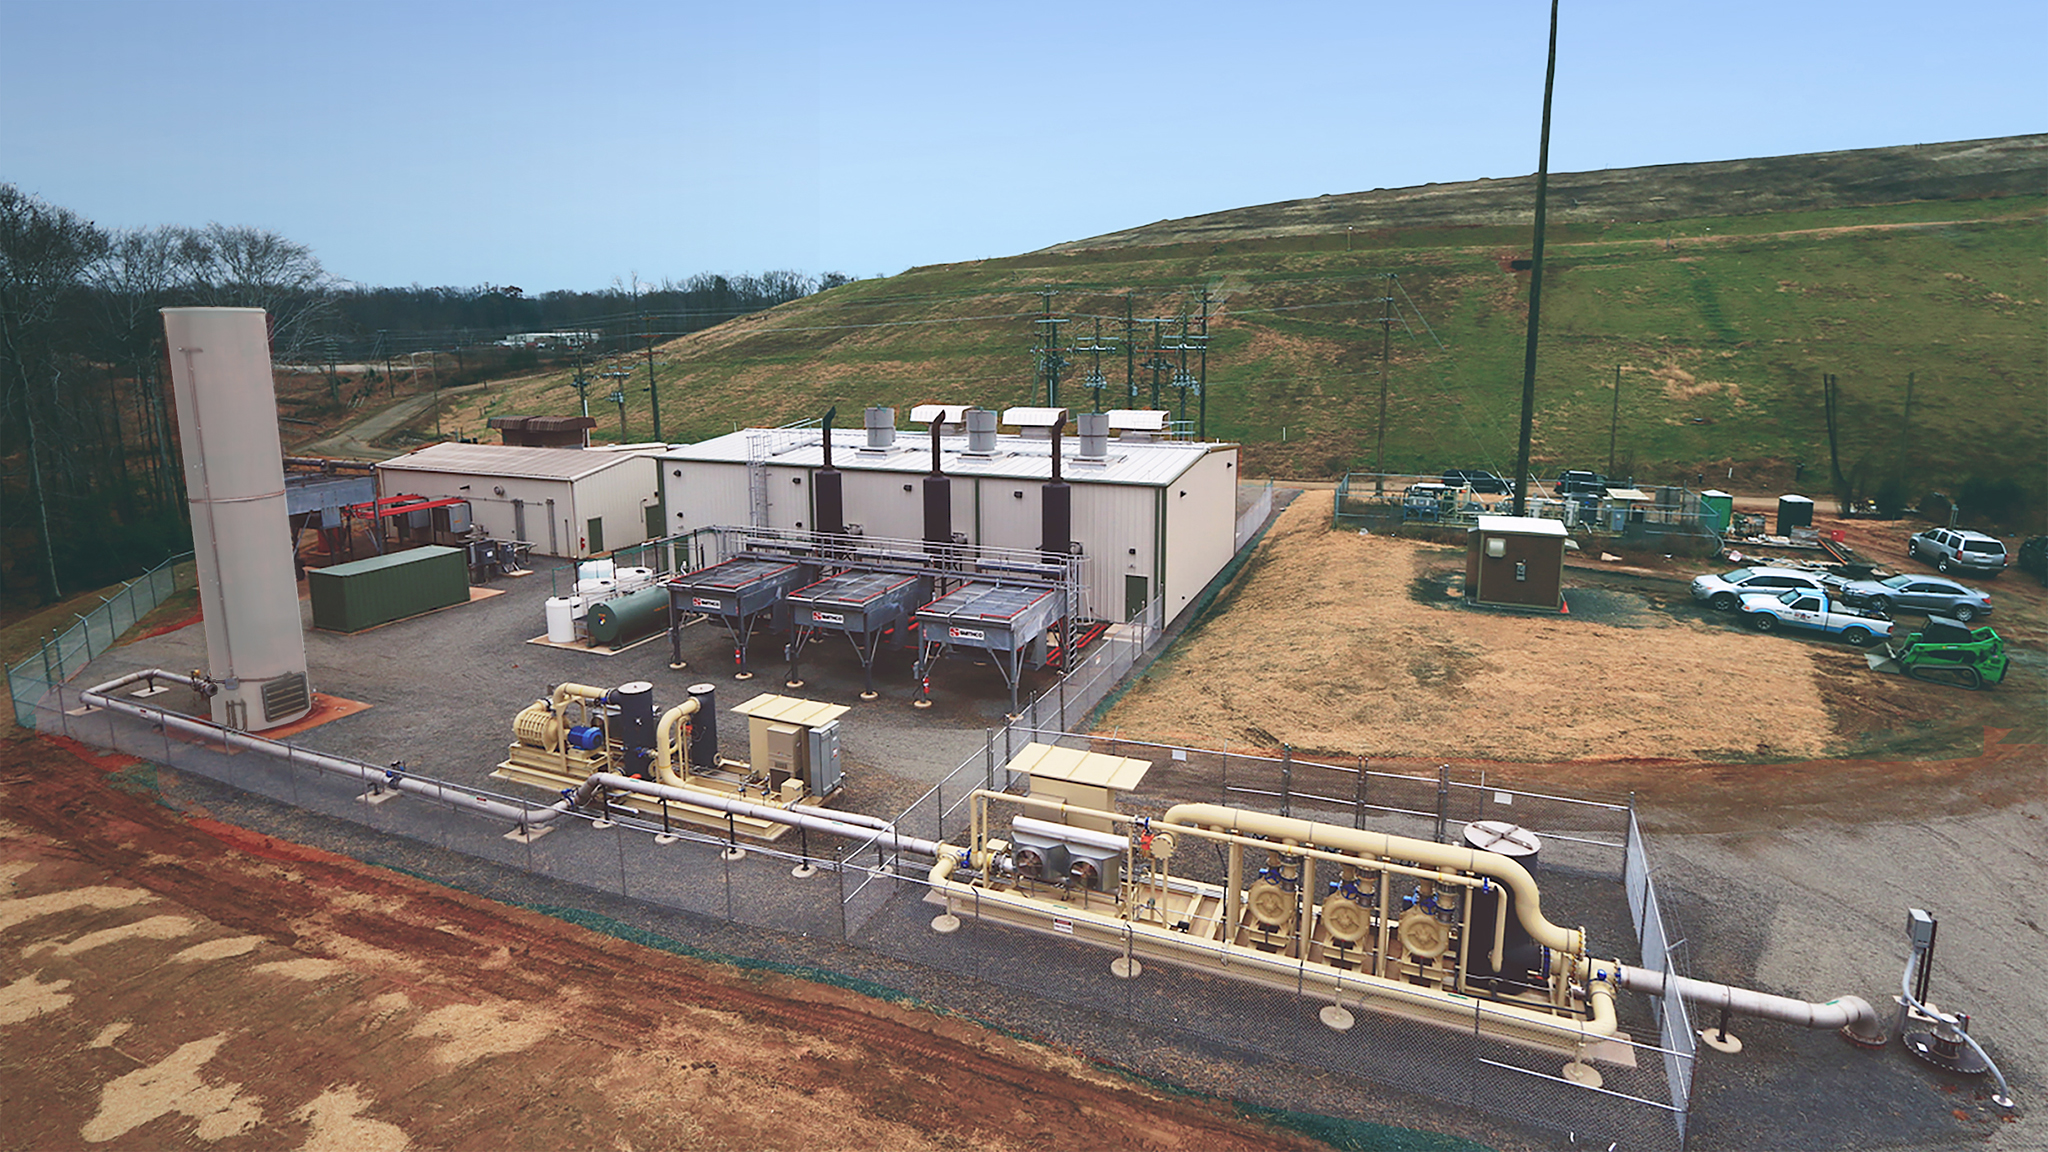 biogas-to-energy - LFGTE - landfill gas to energy - digester gas to energy - epc contractor - 2